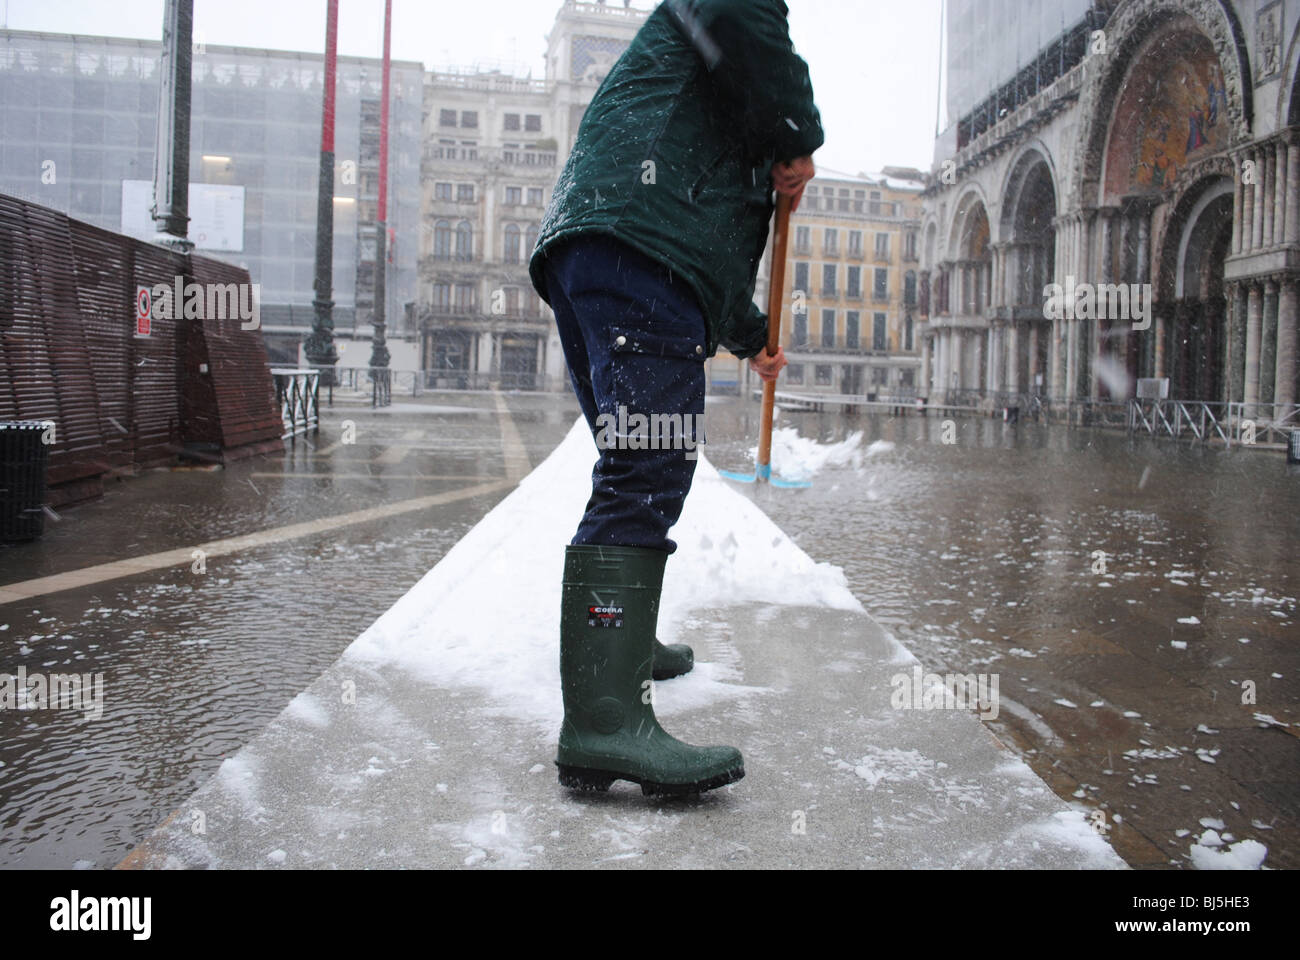 A man clears snow from walkways in a flooded St Mark's Square, Venice, Italy Stock Photo